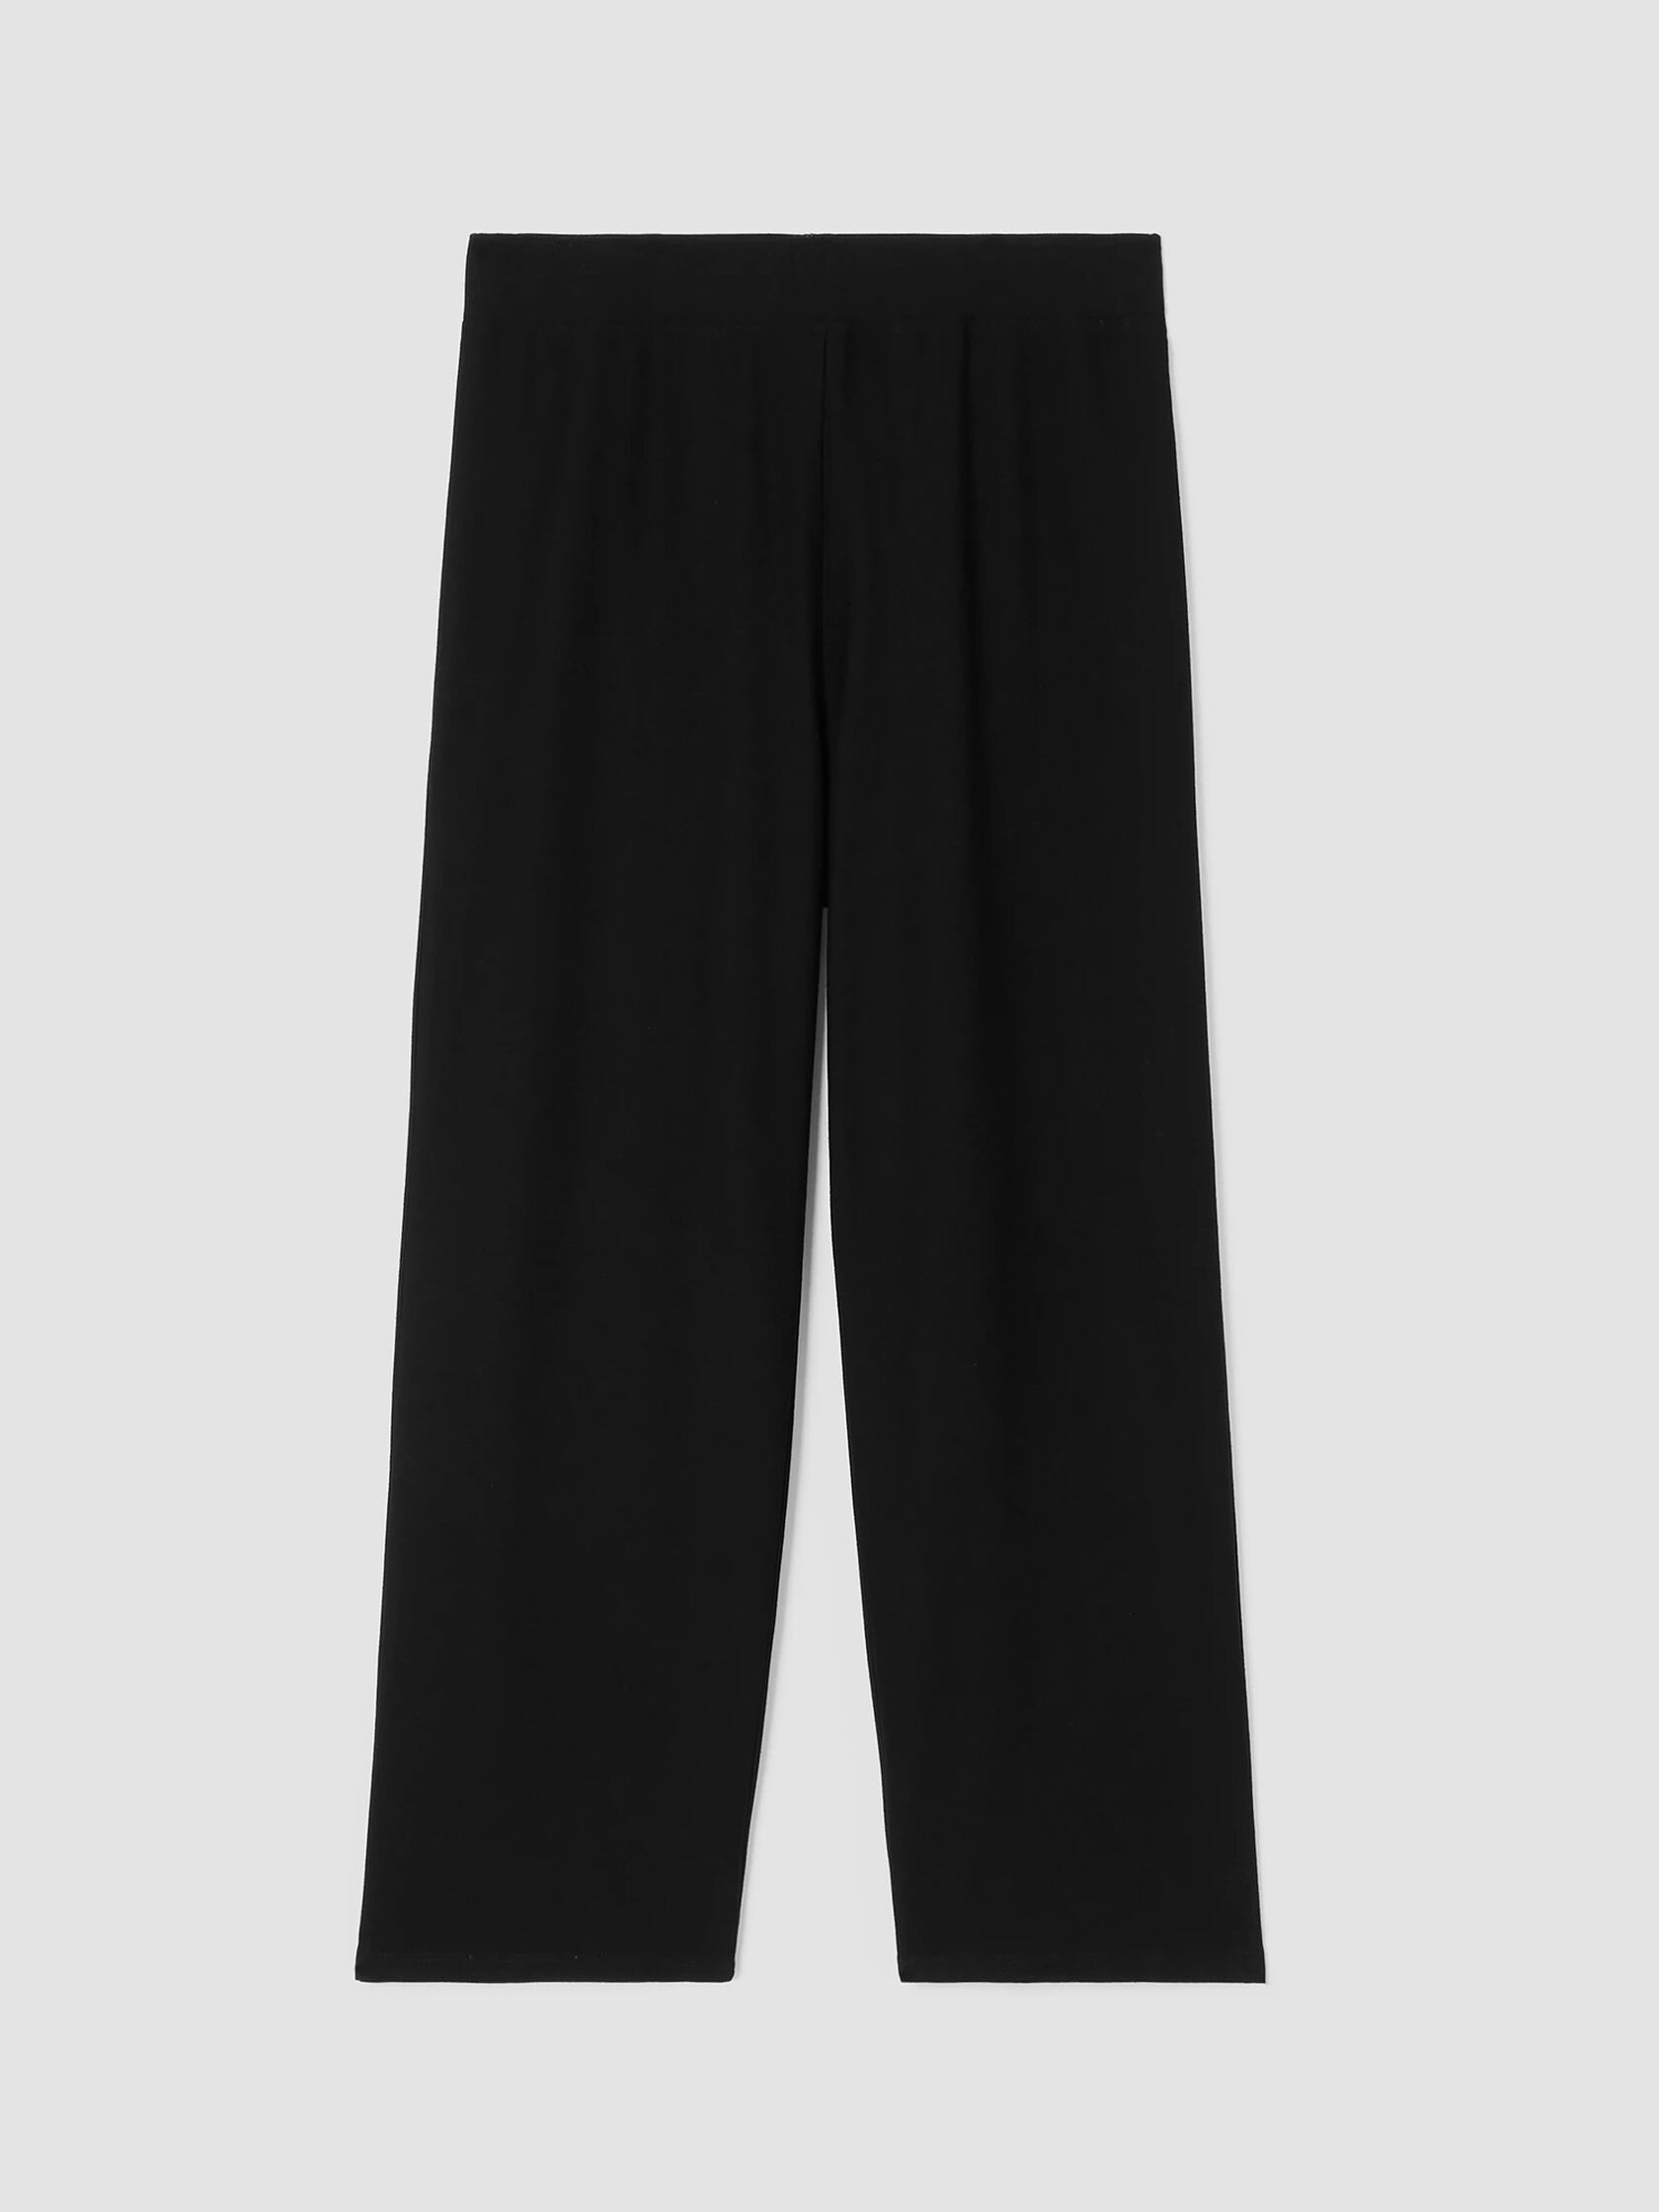 Washable Stretch Crepe Straight Pant with Yoke | EILEEN FISHER